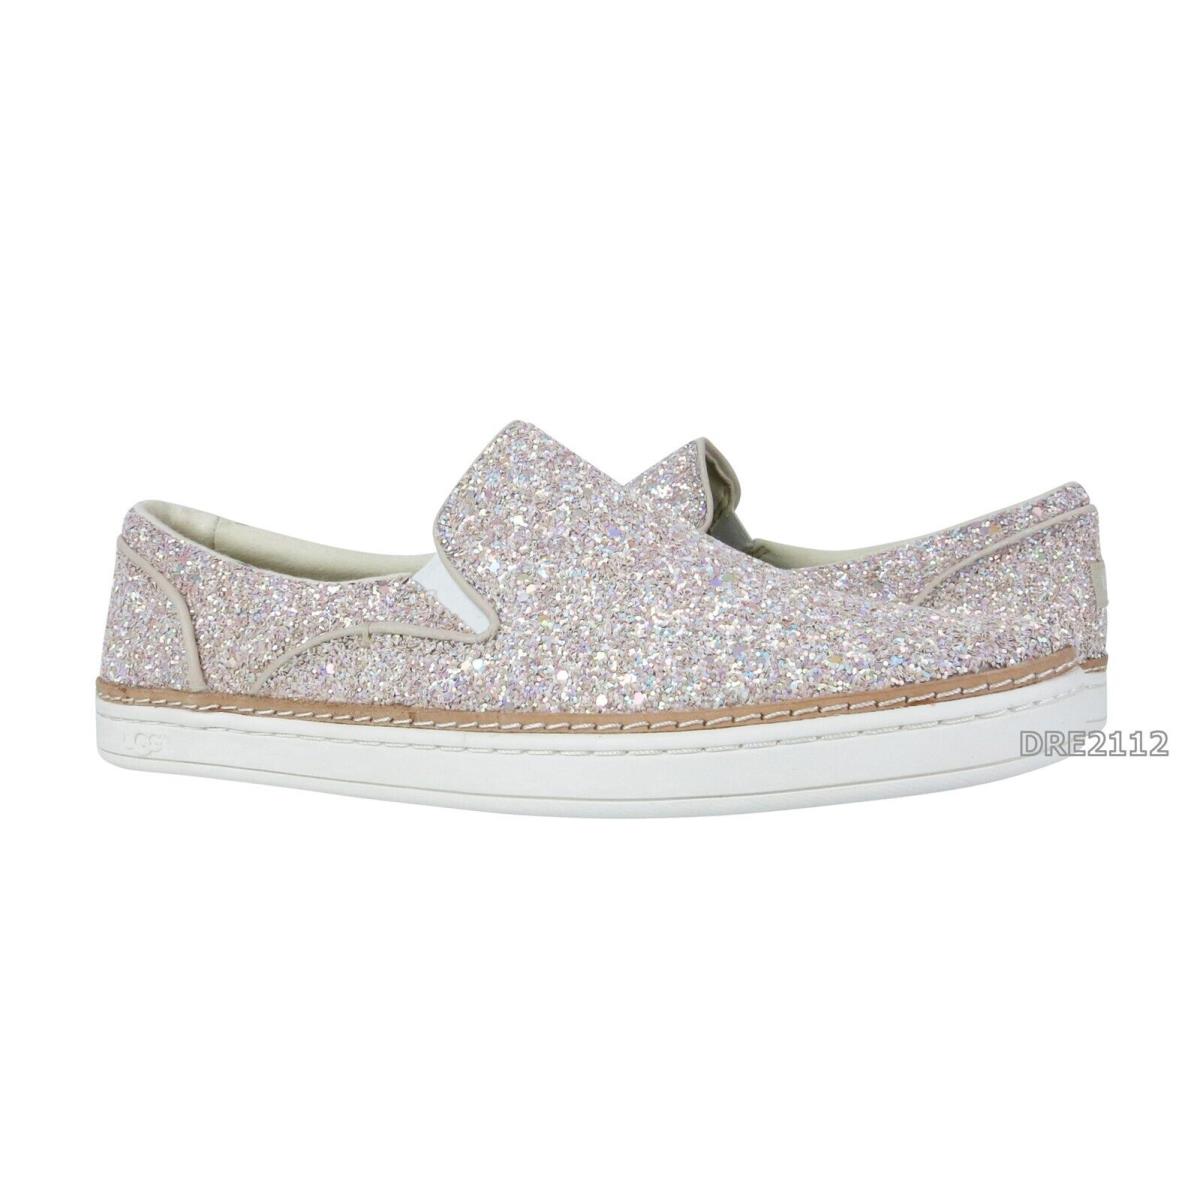 Ugg Adley Chunky Glitter Confetti Leather Slip-on Sneakers Womens Size 8